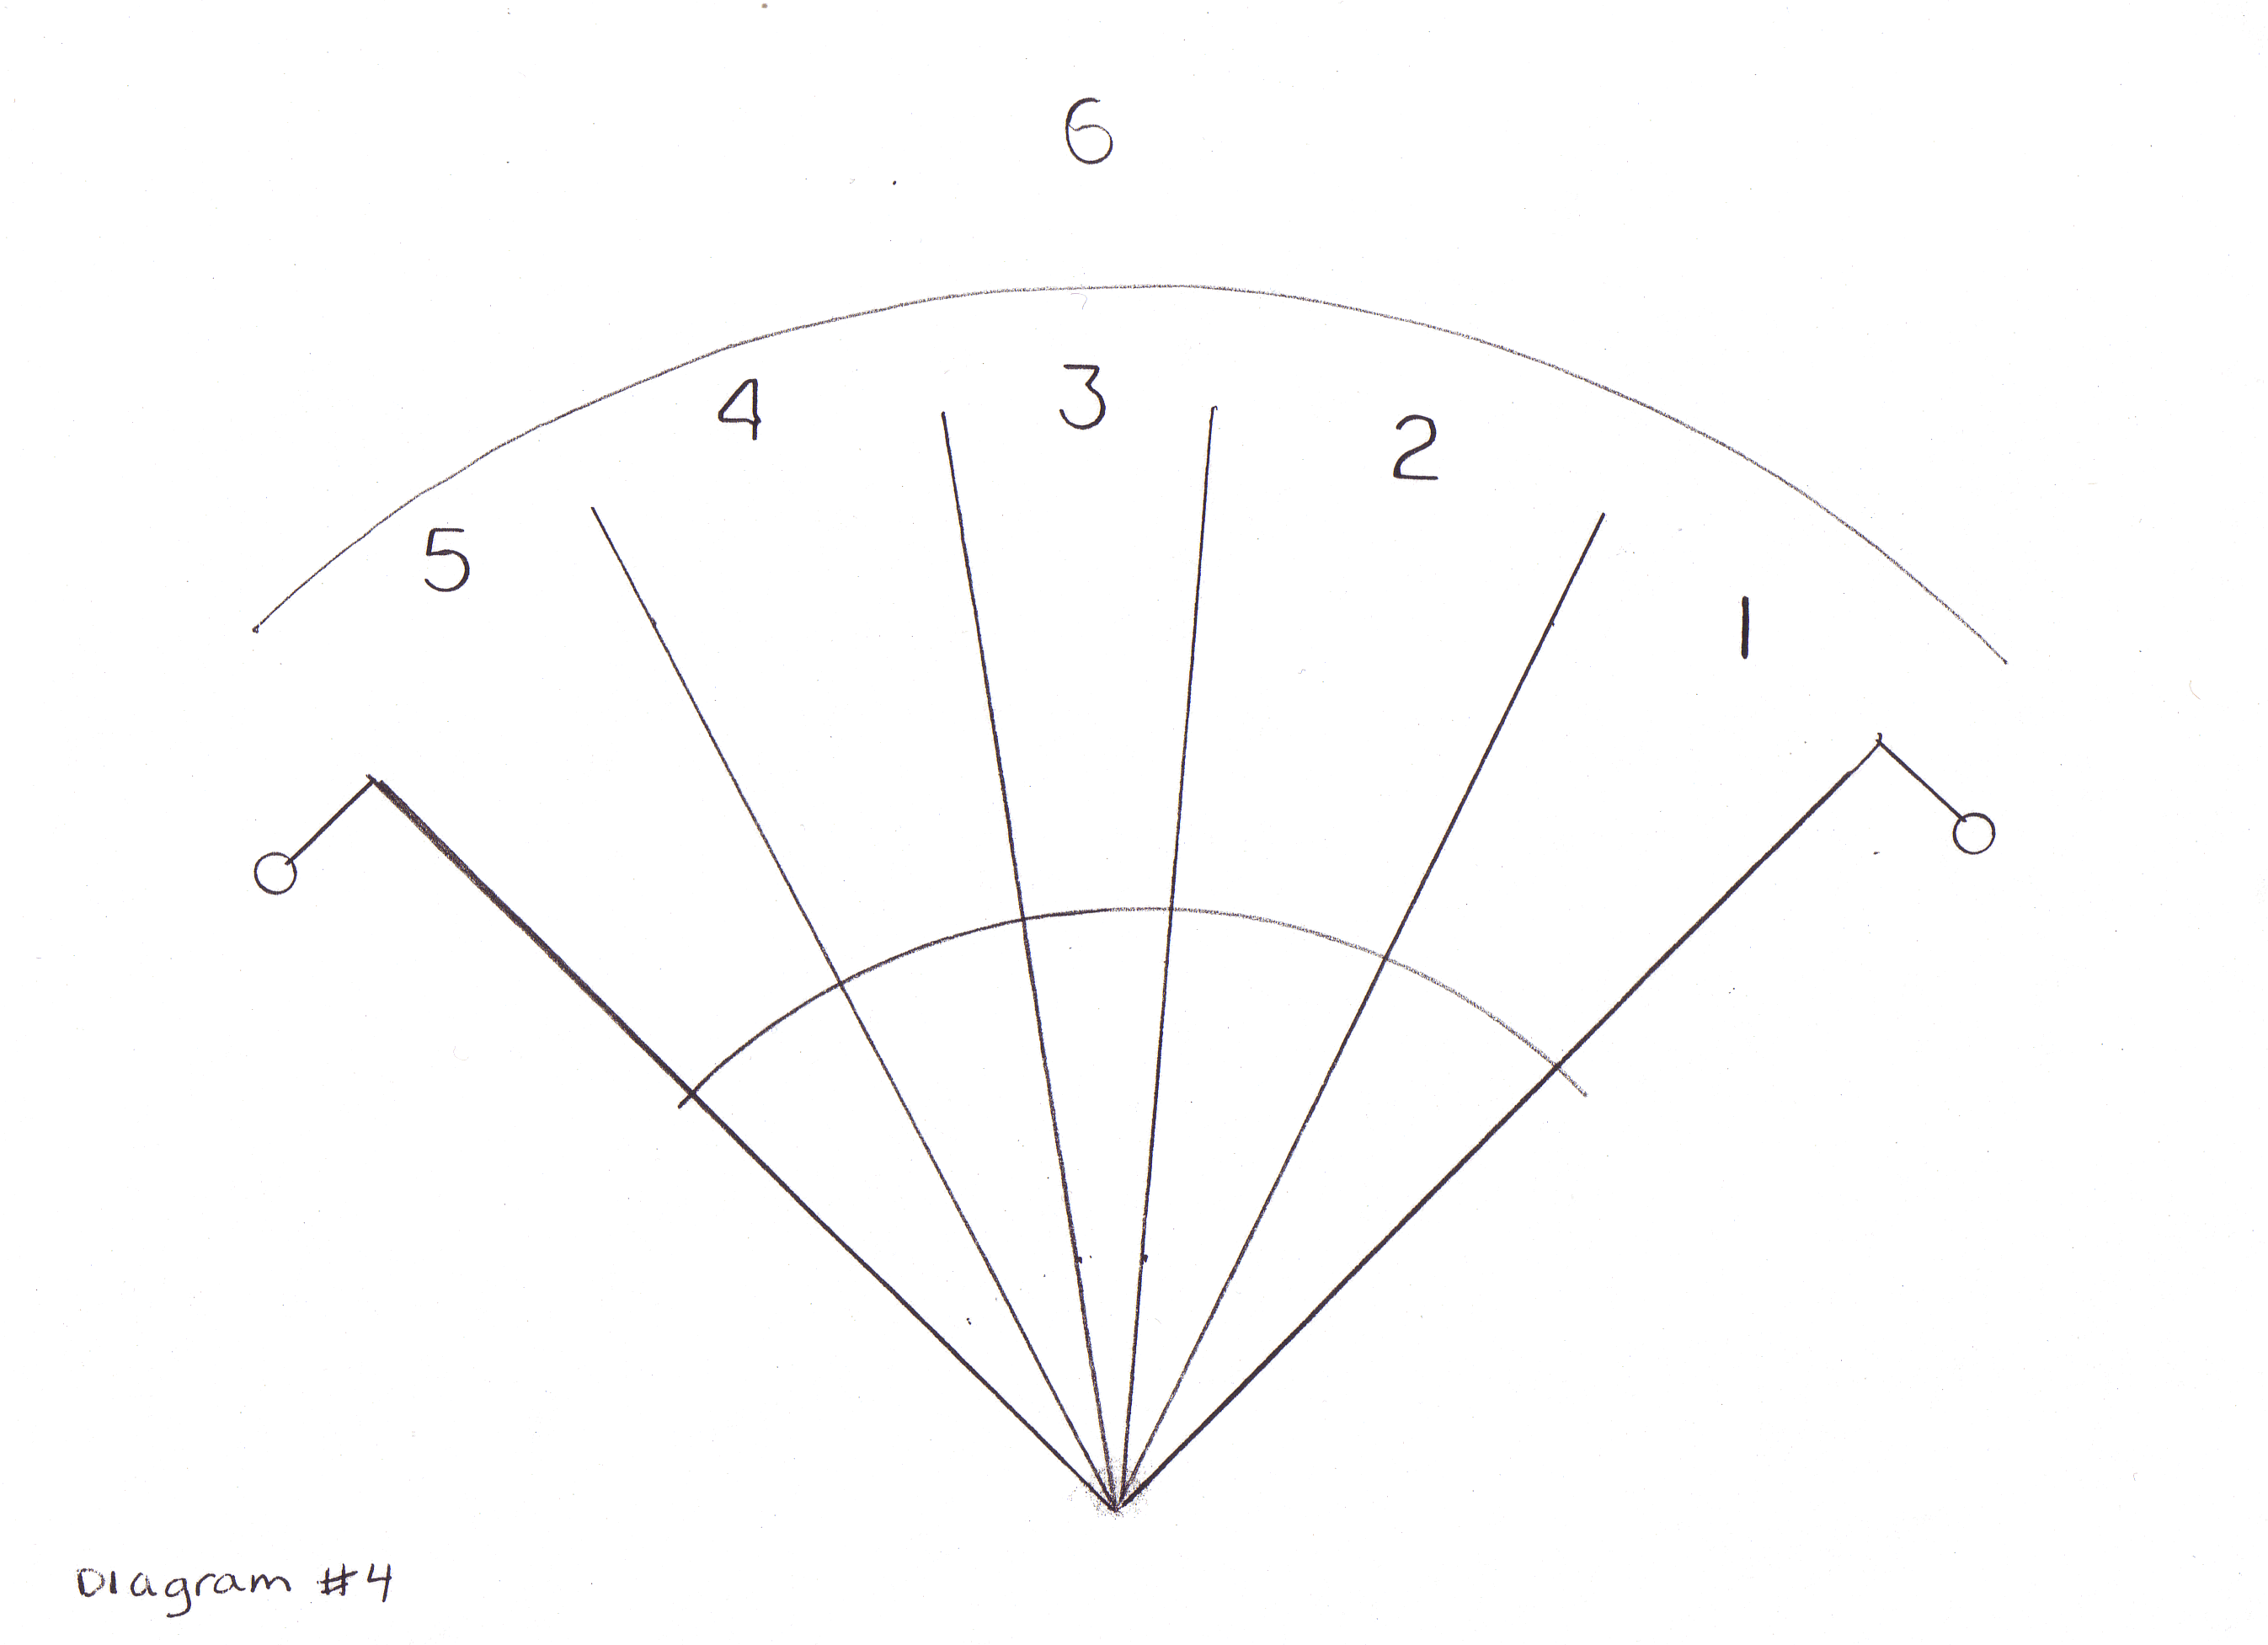 Diagram 4 shows an example of the "pie-shaped" defense.